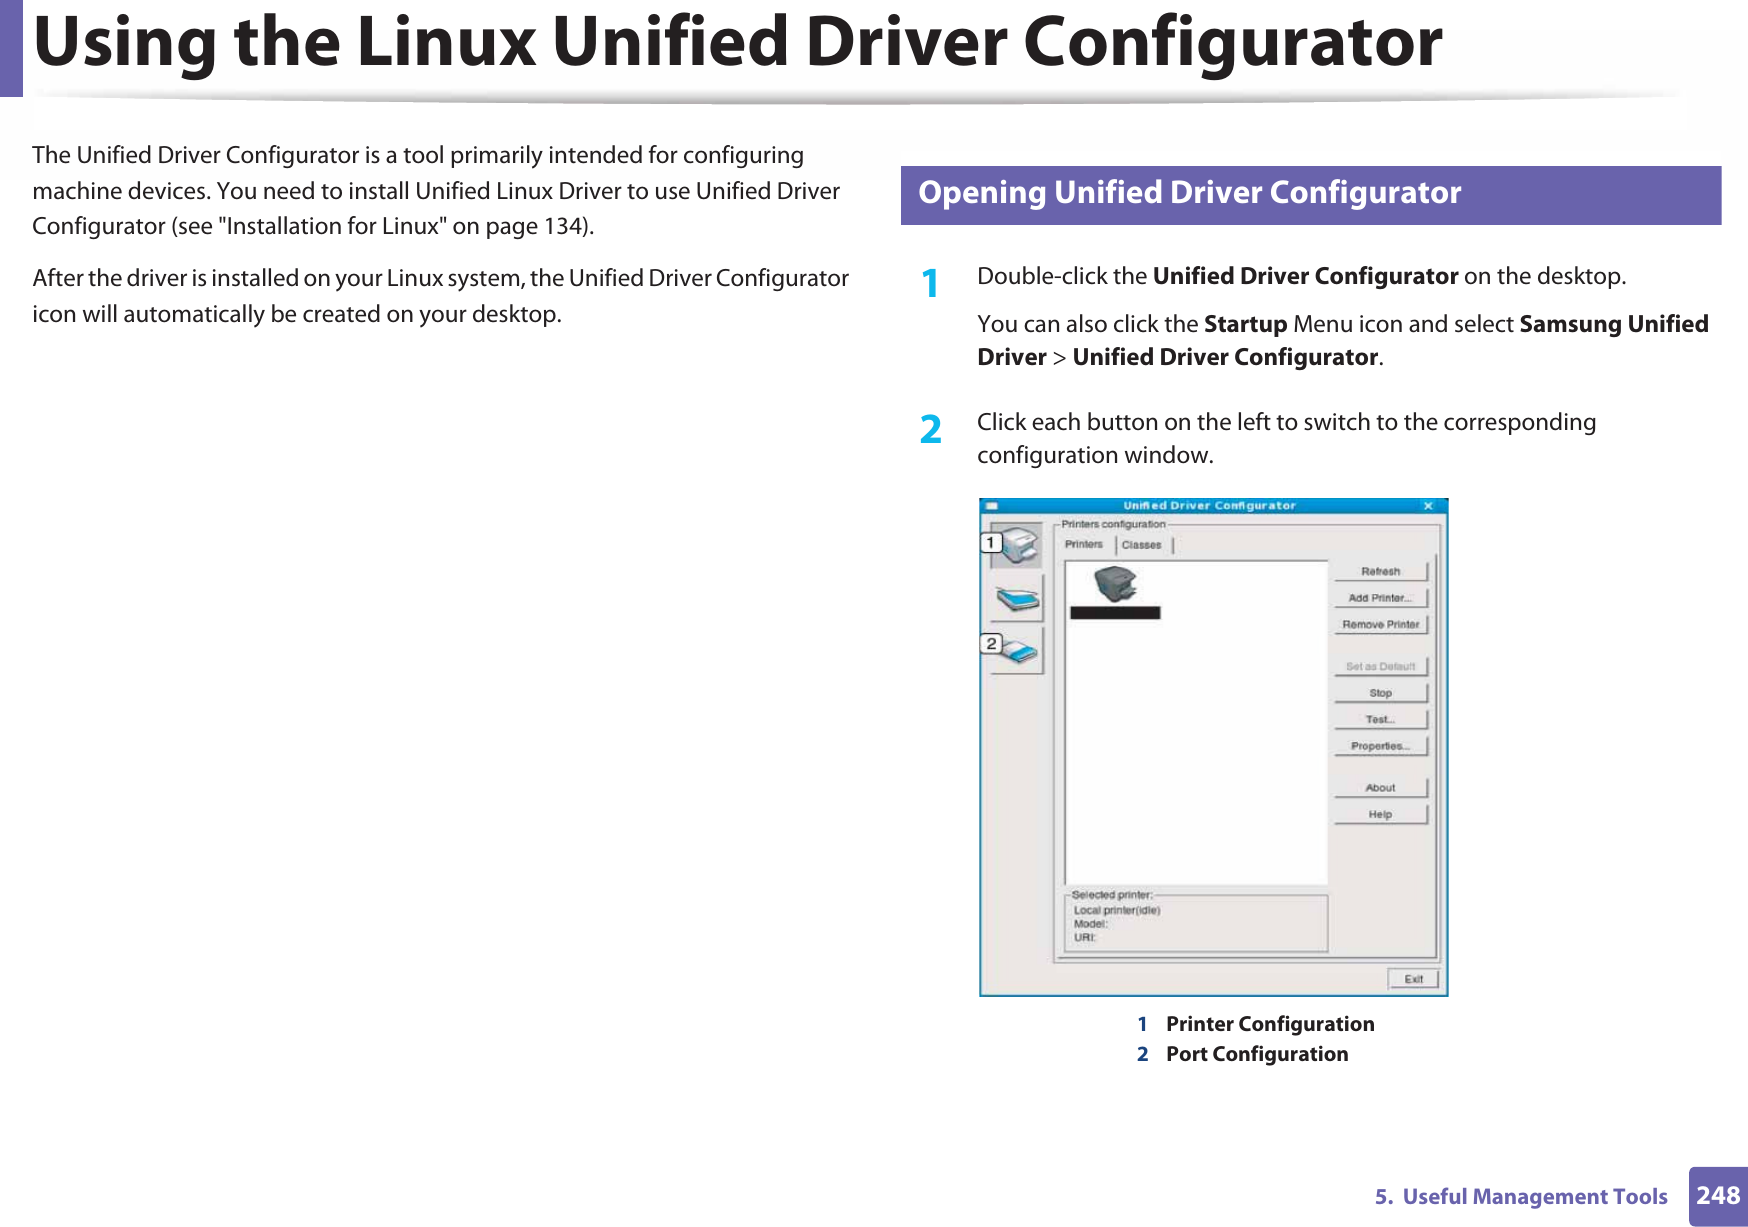 2485.  Useful Management ToolsUsing the Linux Unified Driver ConfiguratorThe Unified Driver Configurator is a tool primarily intended for configuring machine devices. You need to install Unified Linux Driver to use Unified Driver Configurator (see &quot;Installation for Linux&quot; on page 134).After the driver is installed on your Linux system, the Unified Driver Configurator icon will automatically be created on your desktop.11 Opening Unified Driver Configurator1Double-click the Unified Driver Configurator on the desktop.You can also click the Startup Menu icon and select Samsung Unified Driver &gt; Unified Driver Configurator.2  Click each button on the left to switch to the corresponding configuration window.1Printer Configuration 2Port Configuration 